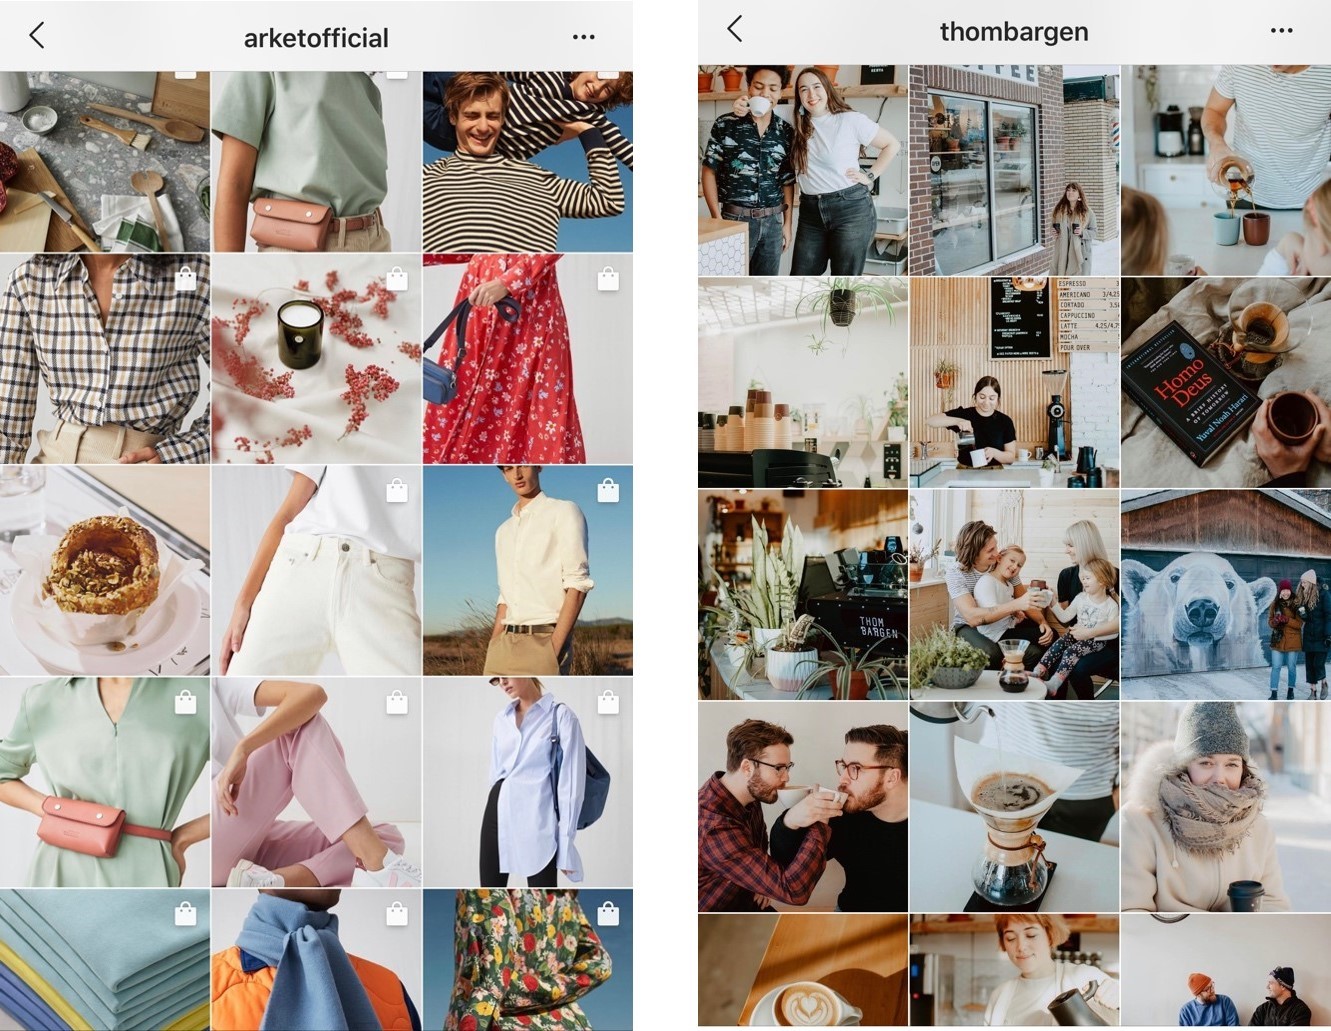 Instagram Feed Theme Example - Thom Bargen and Arket